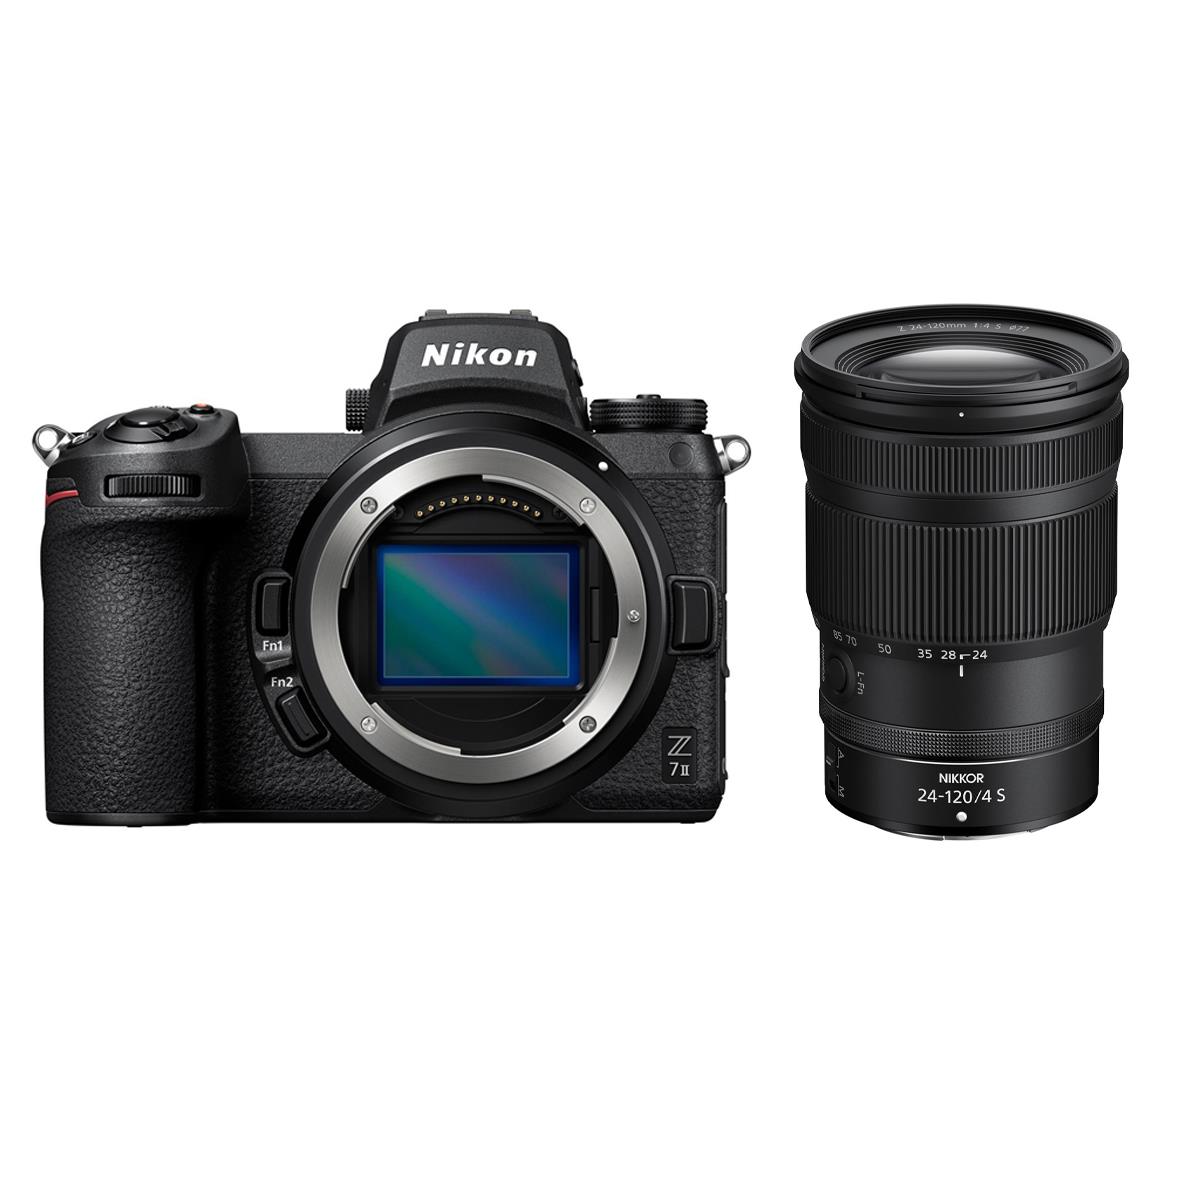 Image of Nikon Z 7II Mirrorless Camera with 24-120mm f/4 S Lens